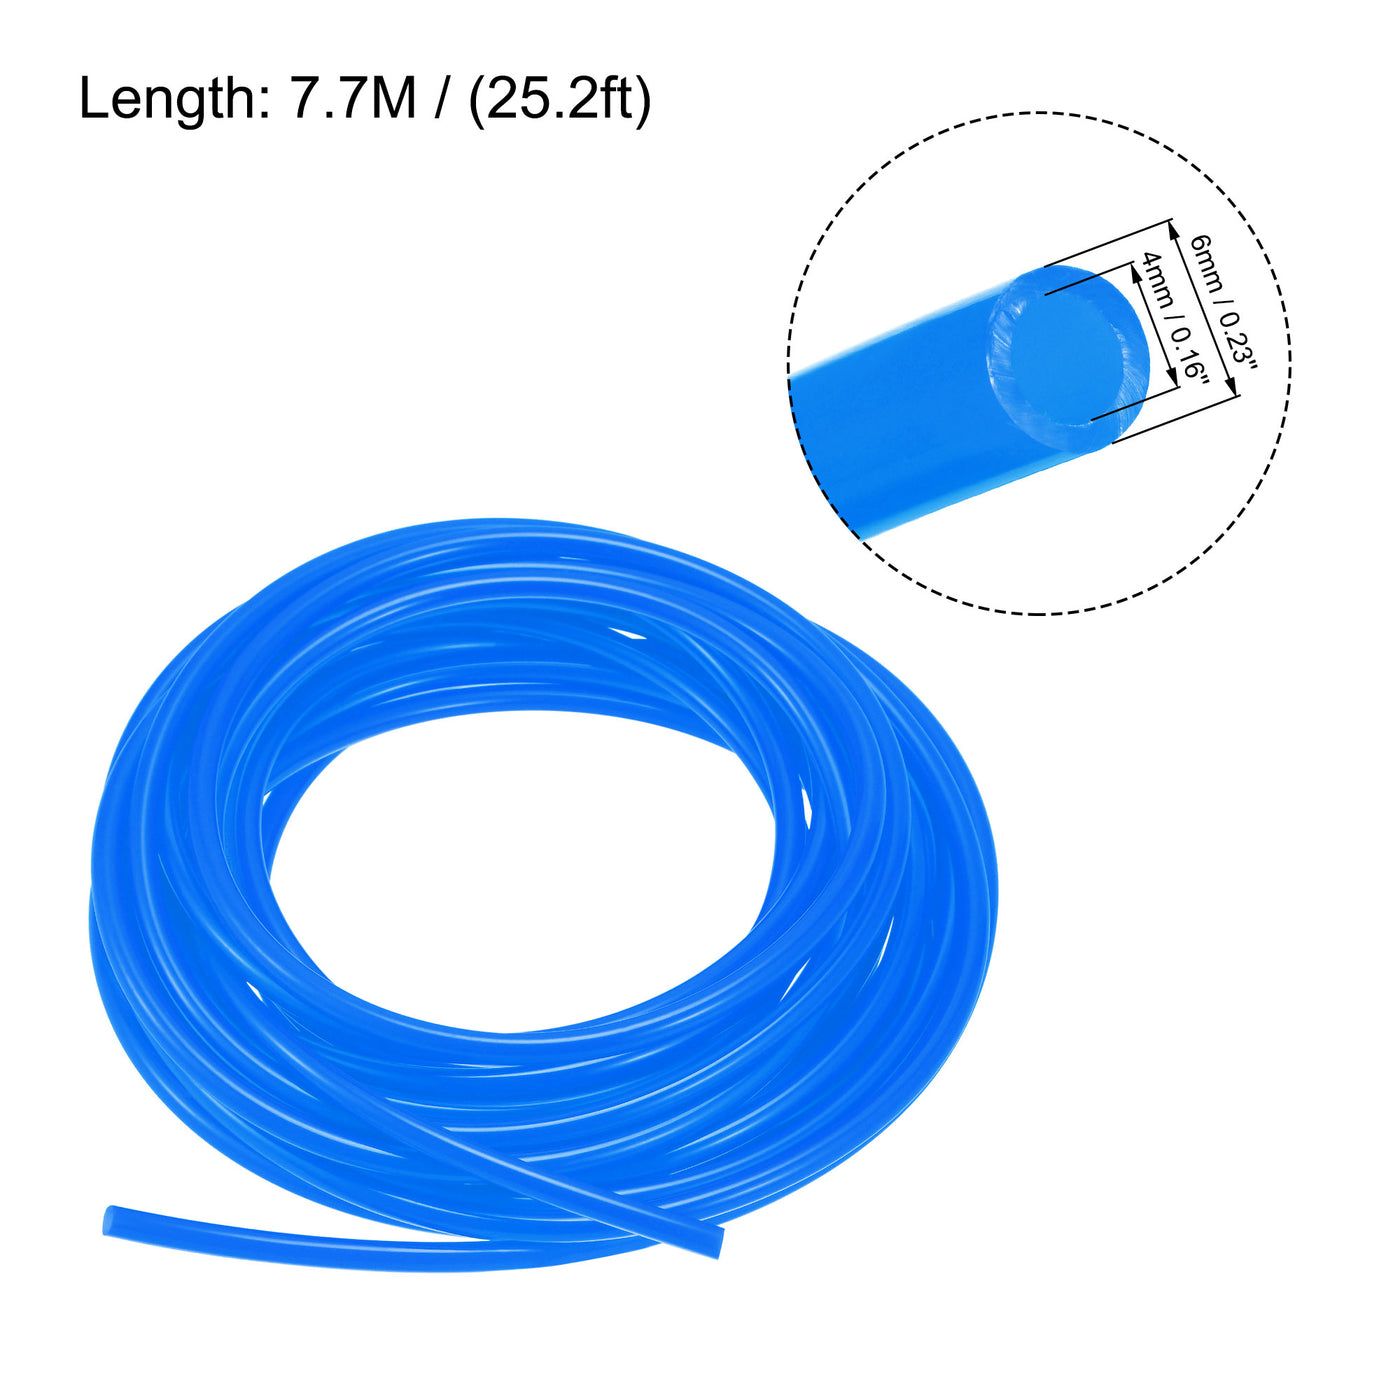 uxcell Uxcell Pneumatic Air Hose Tubing Air Compressor Tube 4mm/0.16''ID x 6mm/0.23''OD x 7.7m/25.2Ft Polyurethane Pipe Blue